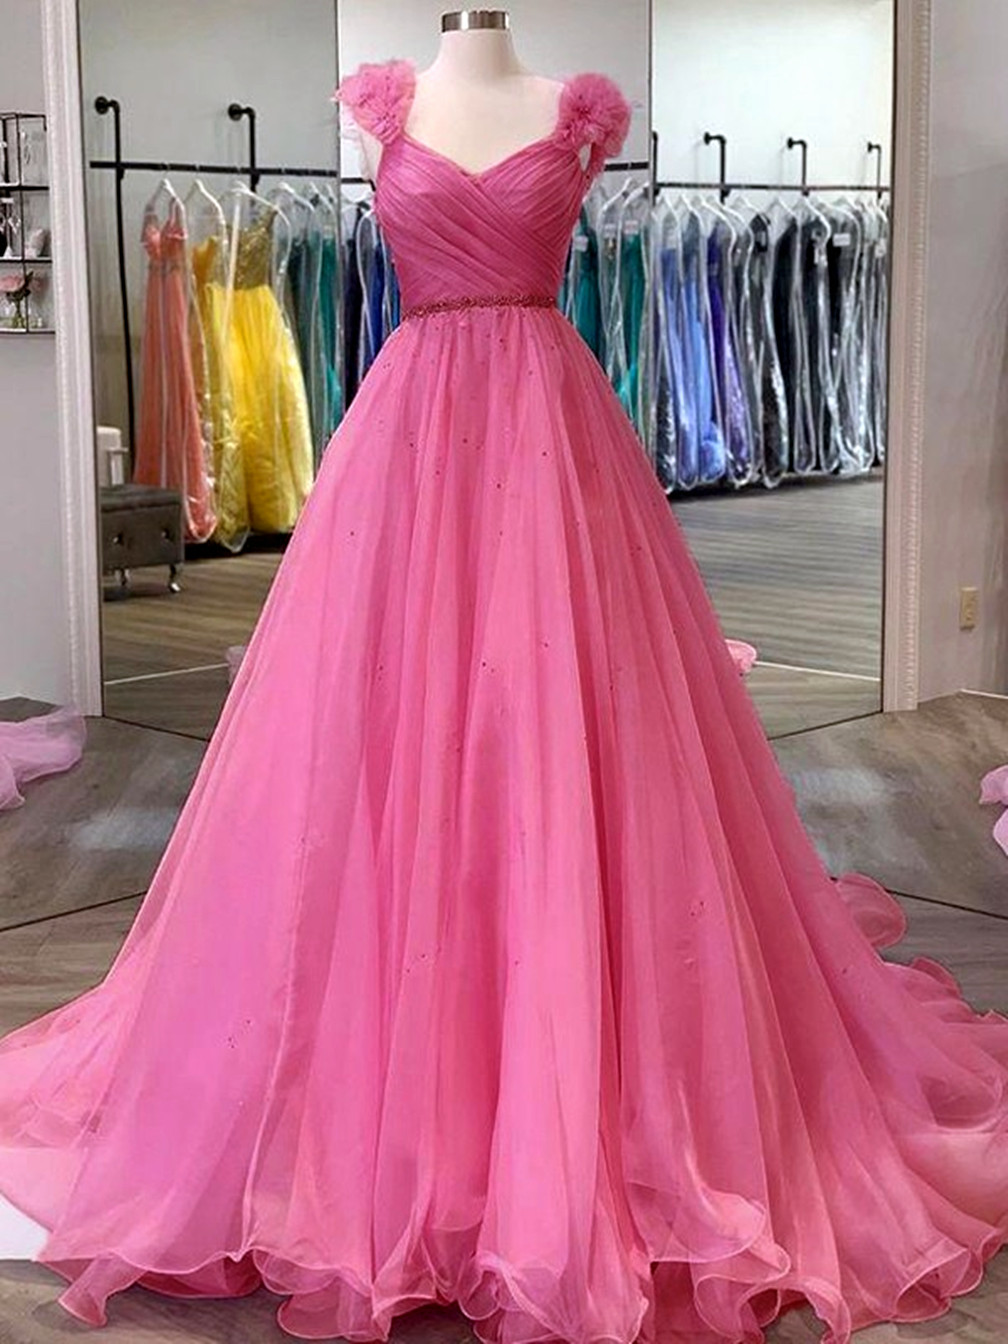 Women A-line/princess Prom Dresses Long Organza V-neck Evening Gowns Sleeveless Formal Party Dress Yp020